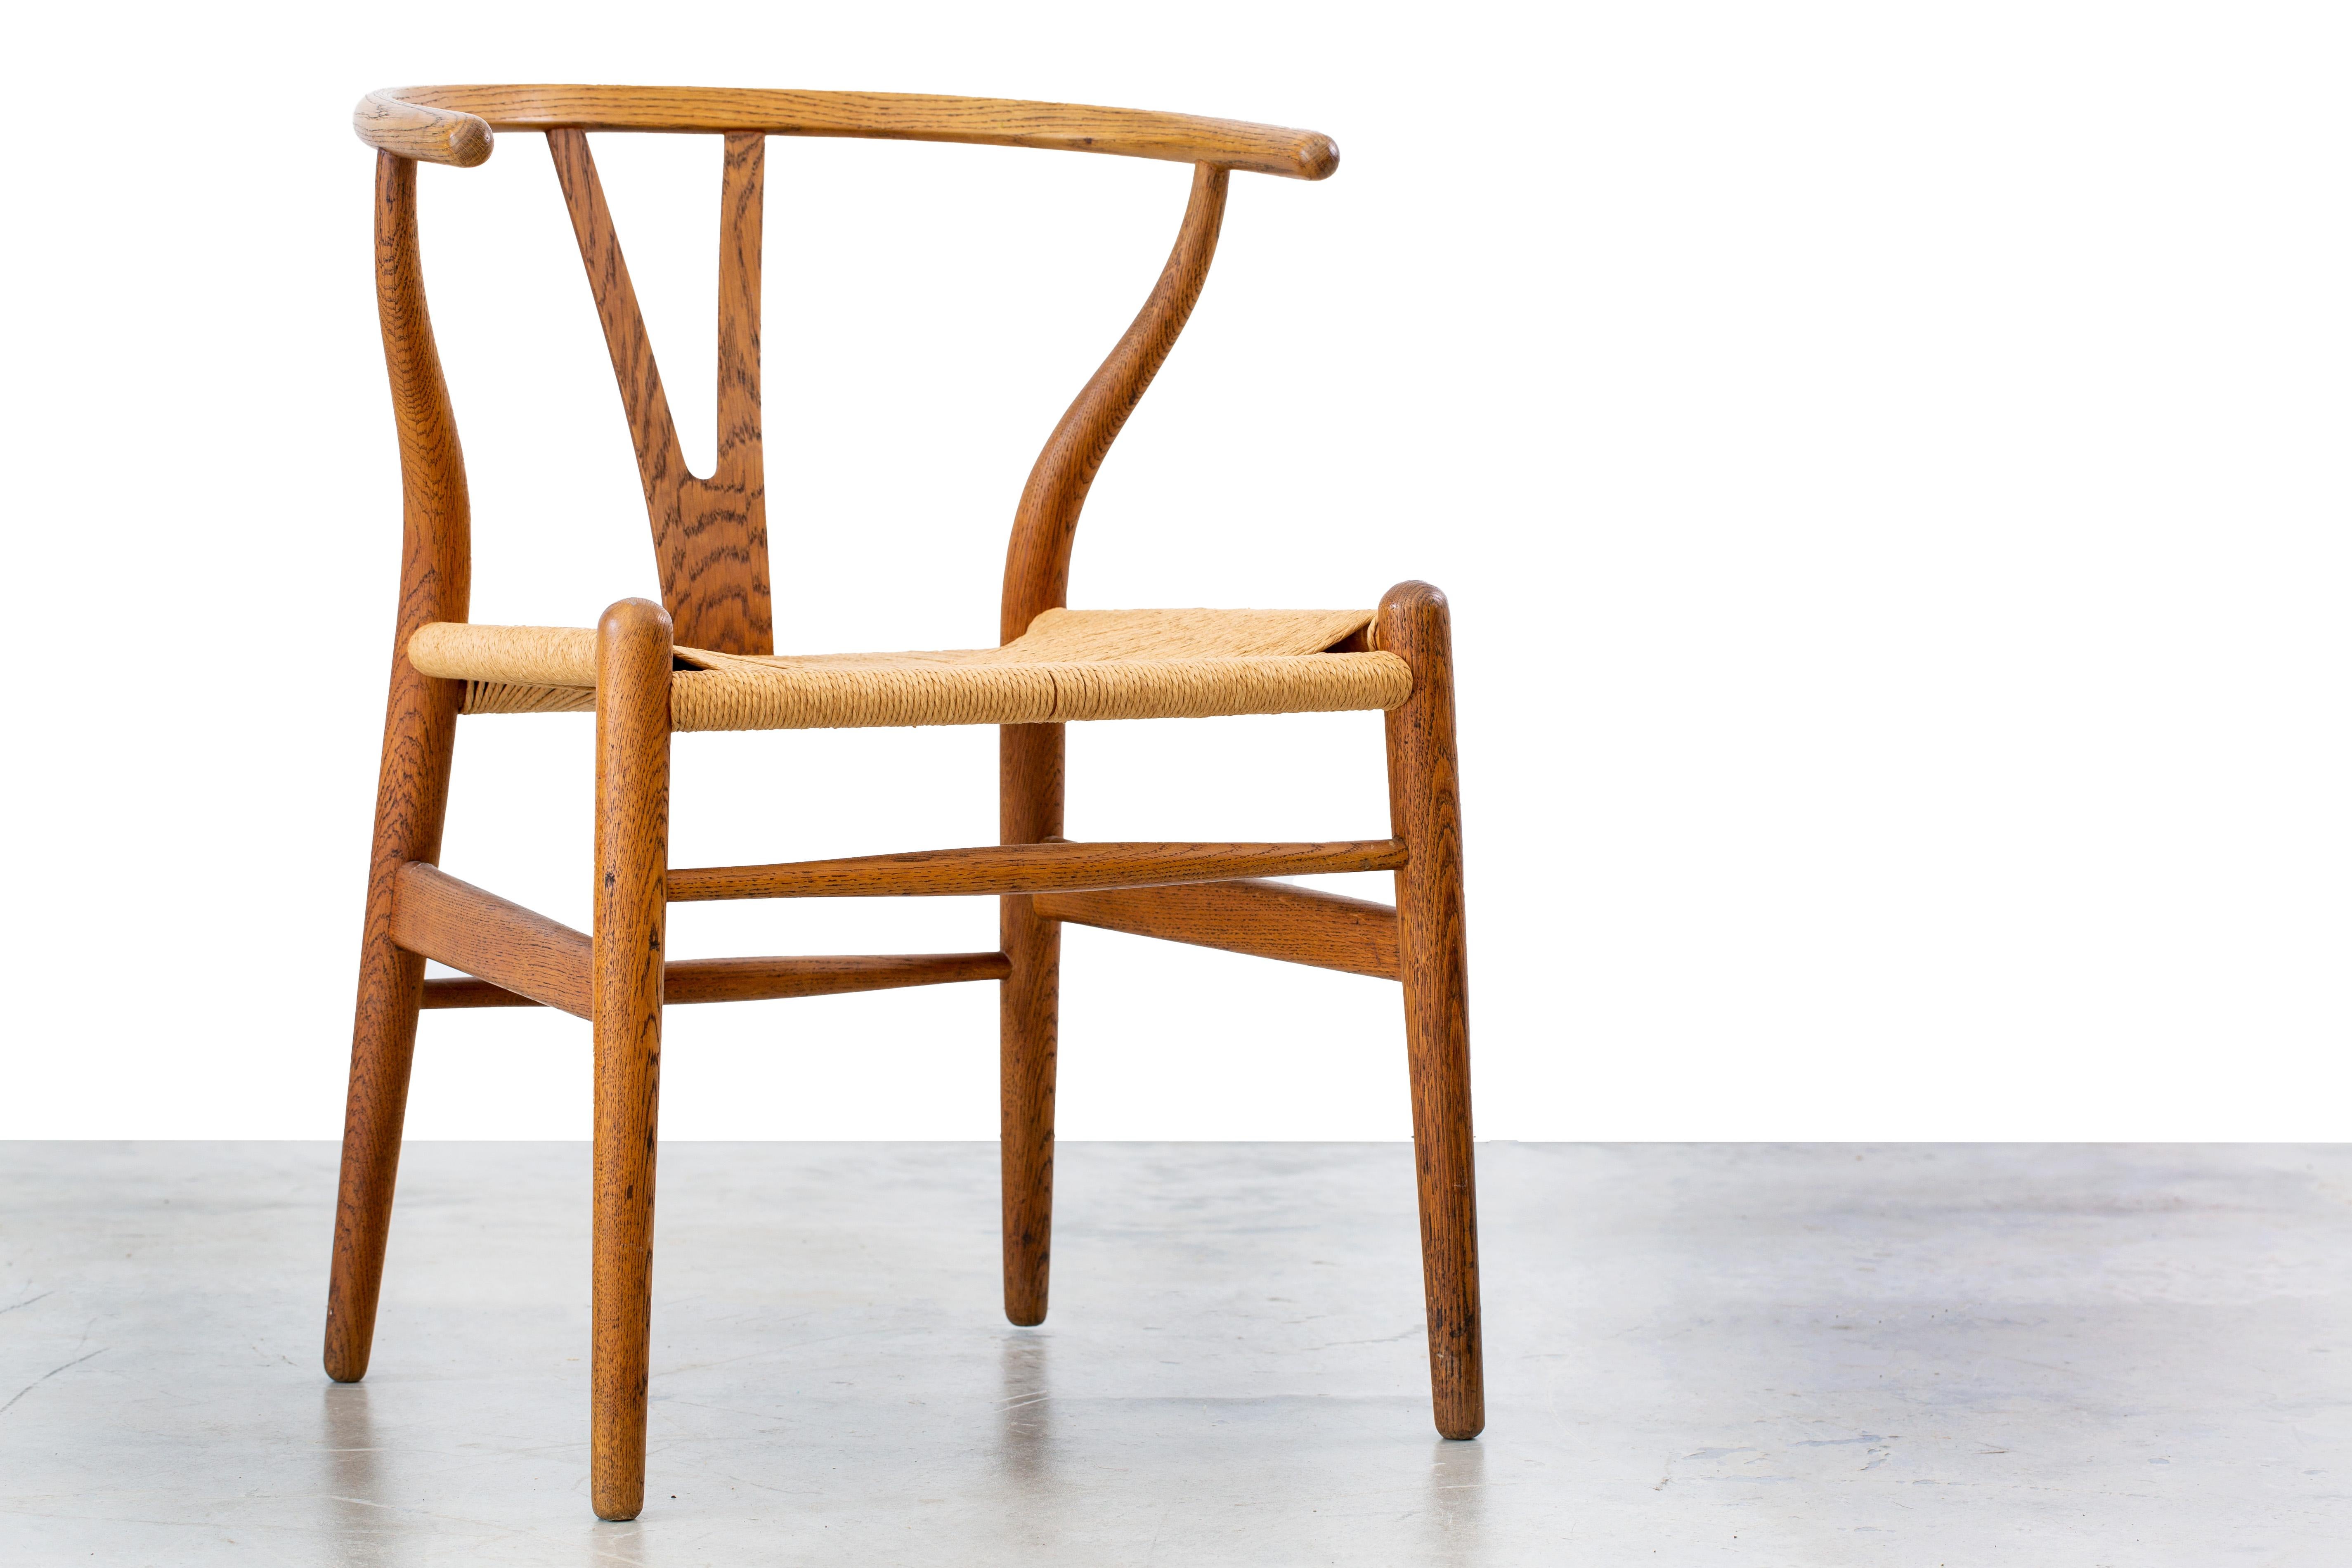 The Iconic wishbone chair, model number CH24, designed by Hans Wegner and imported by Illums Bolighus.  This example is a time capsule piece, with original oak and paper cord seat all in fantastic condition.  This chair would work well alongside